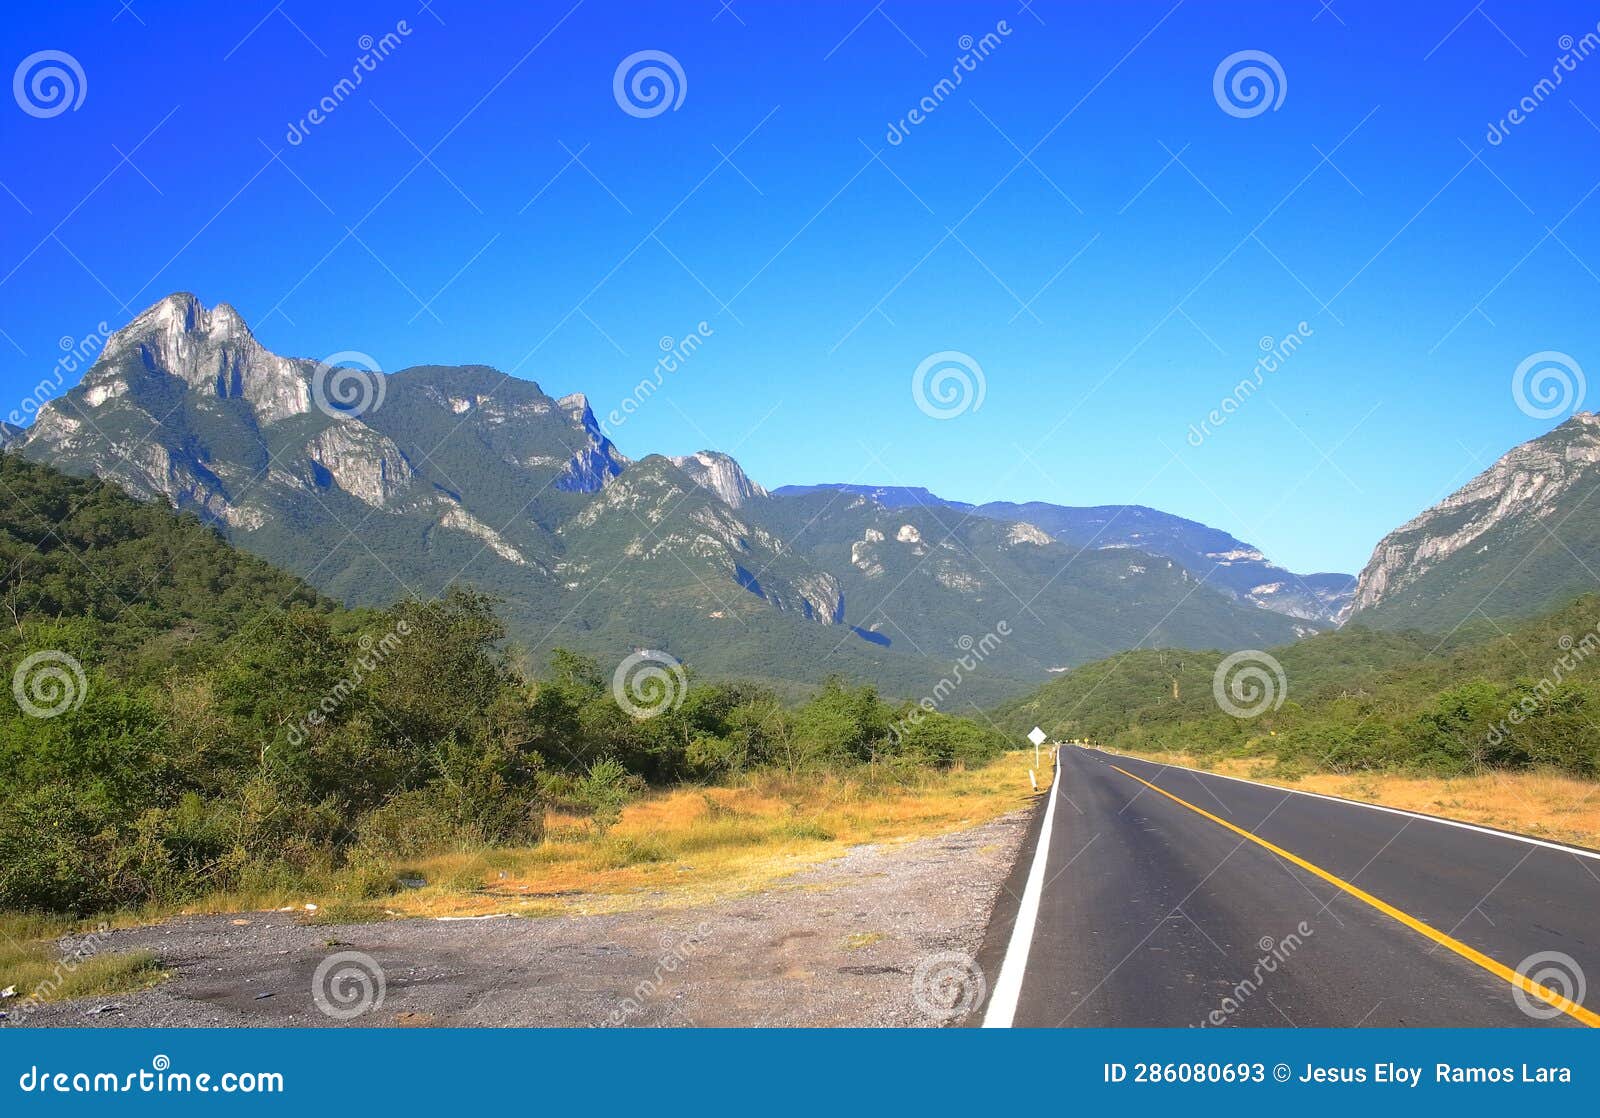 mountains and road in nuevo leon, mexico v